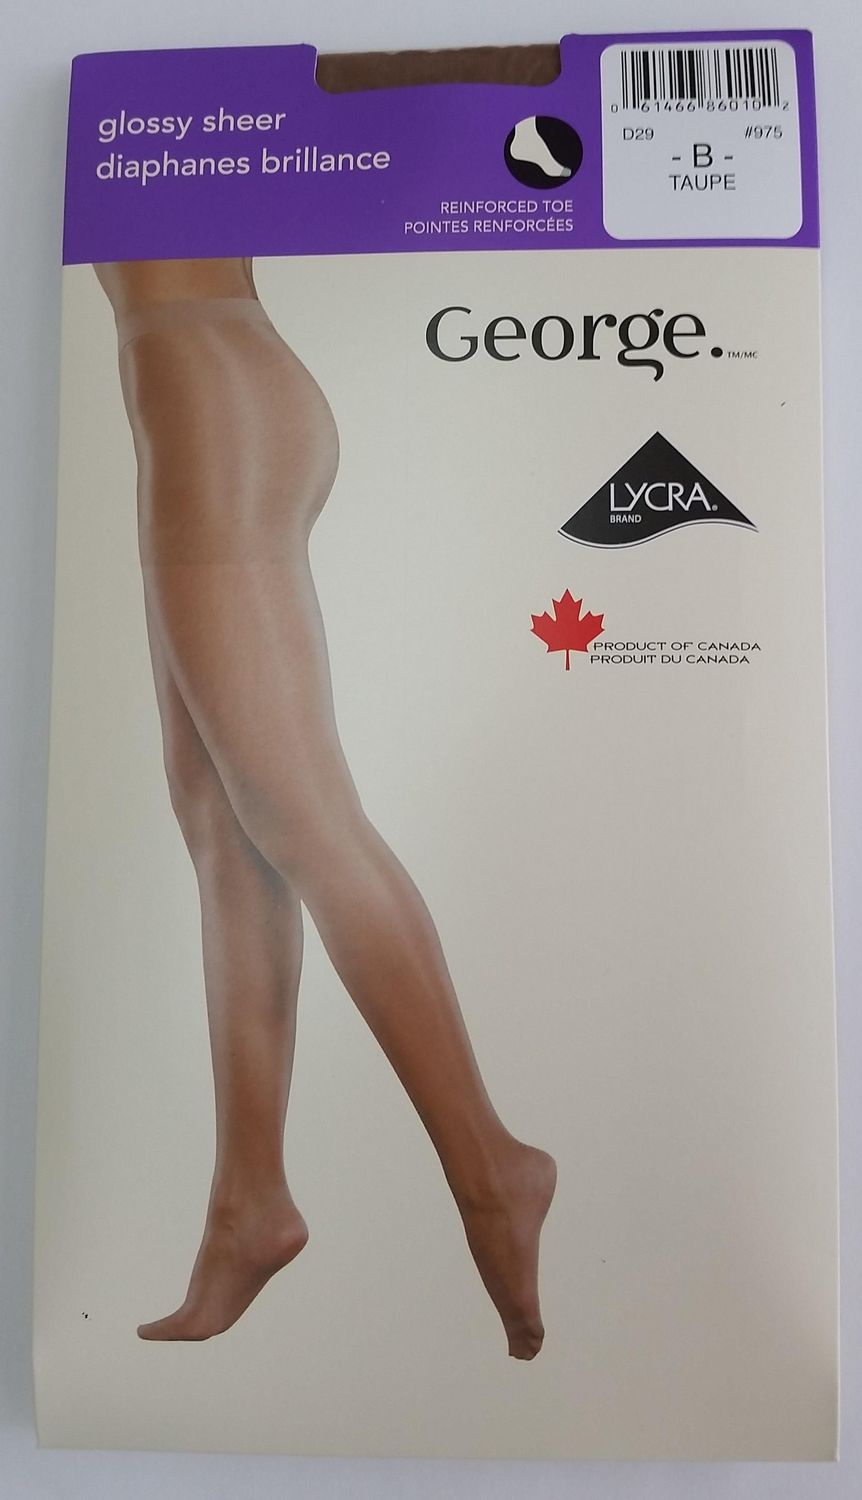 George Women's Pantyhose 5-Pack, One Size 